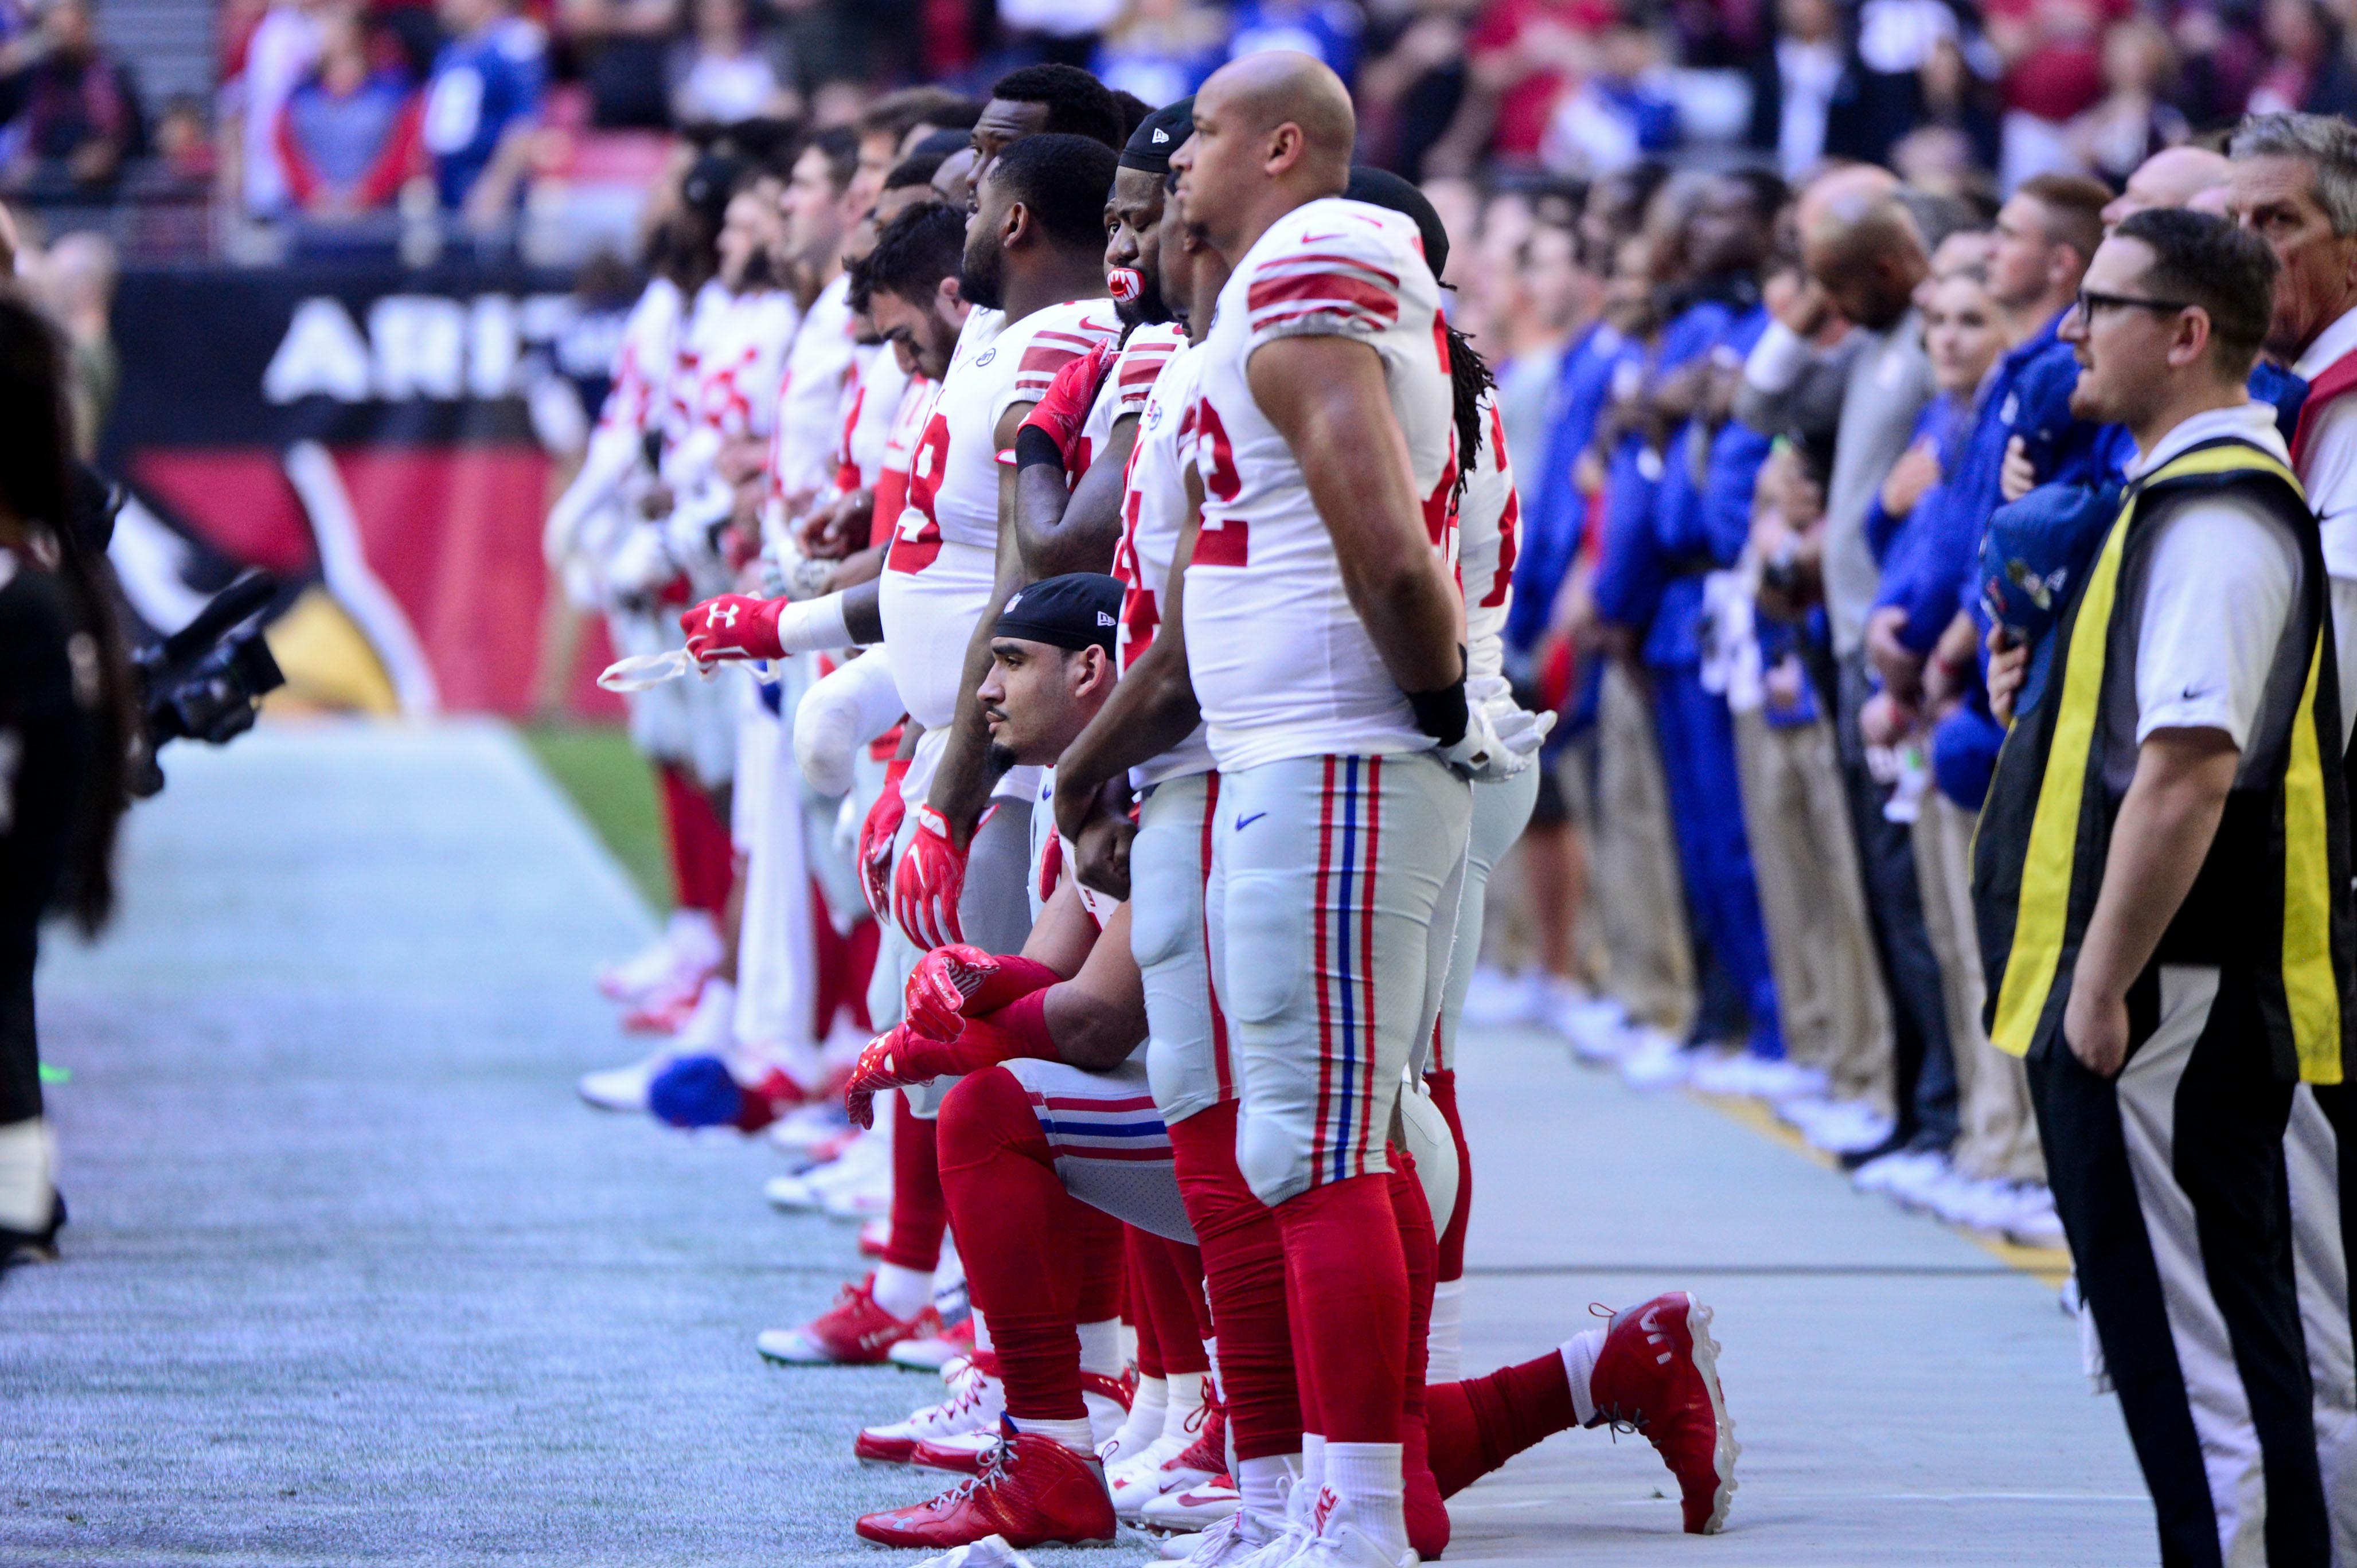 NFL: Players on Field Must Stand for the National Anthem